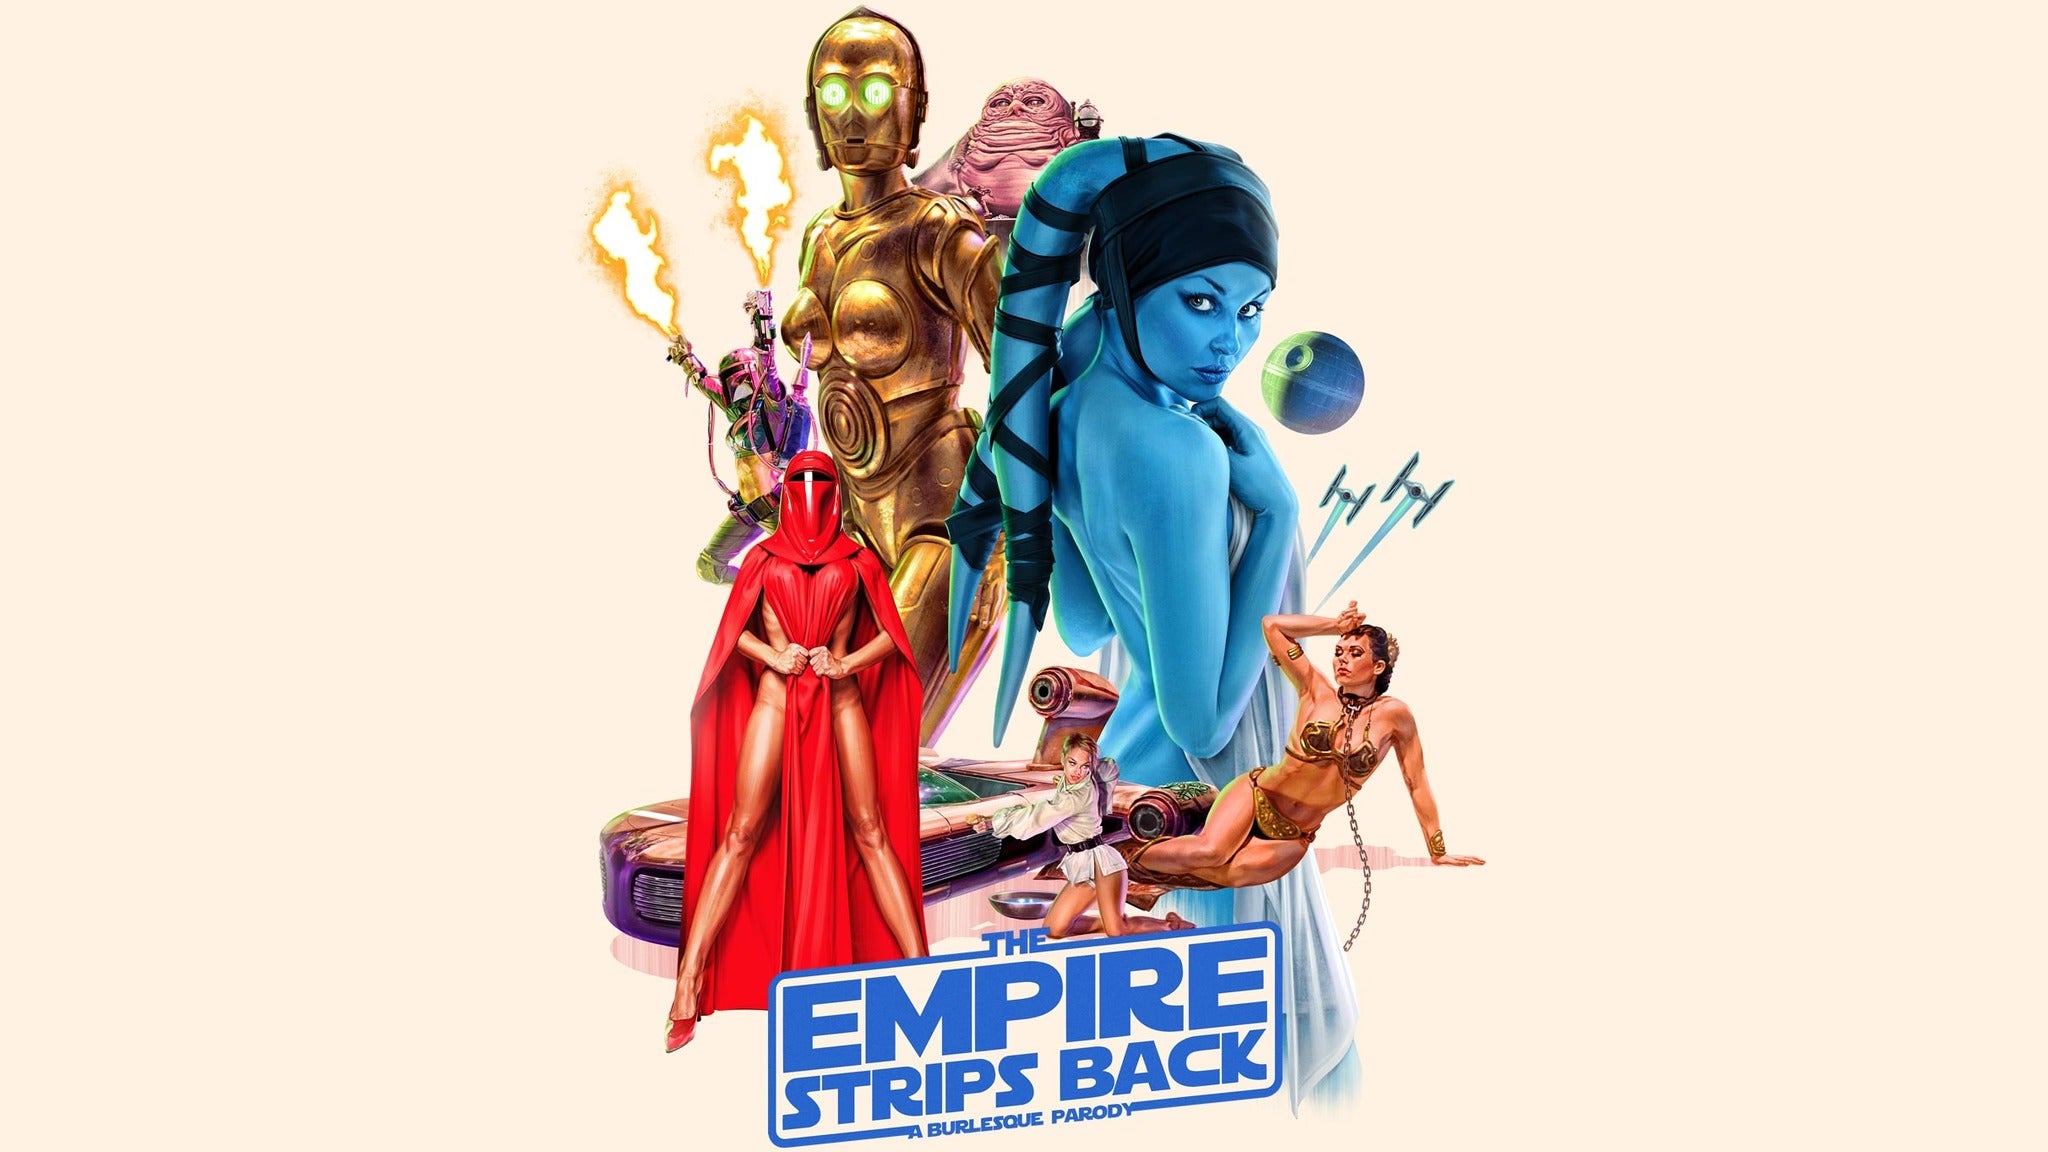 The Empire Strips Back: A Burlesque Parody in Riverside promo photo for Live Nation presale offer code